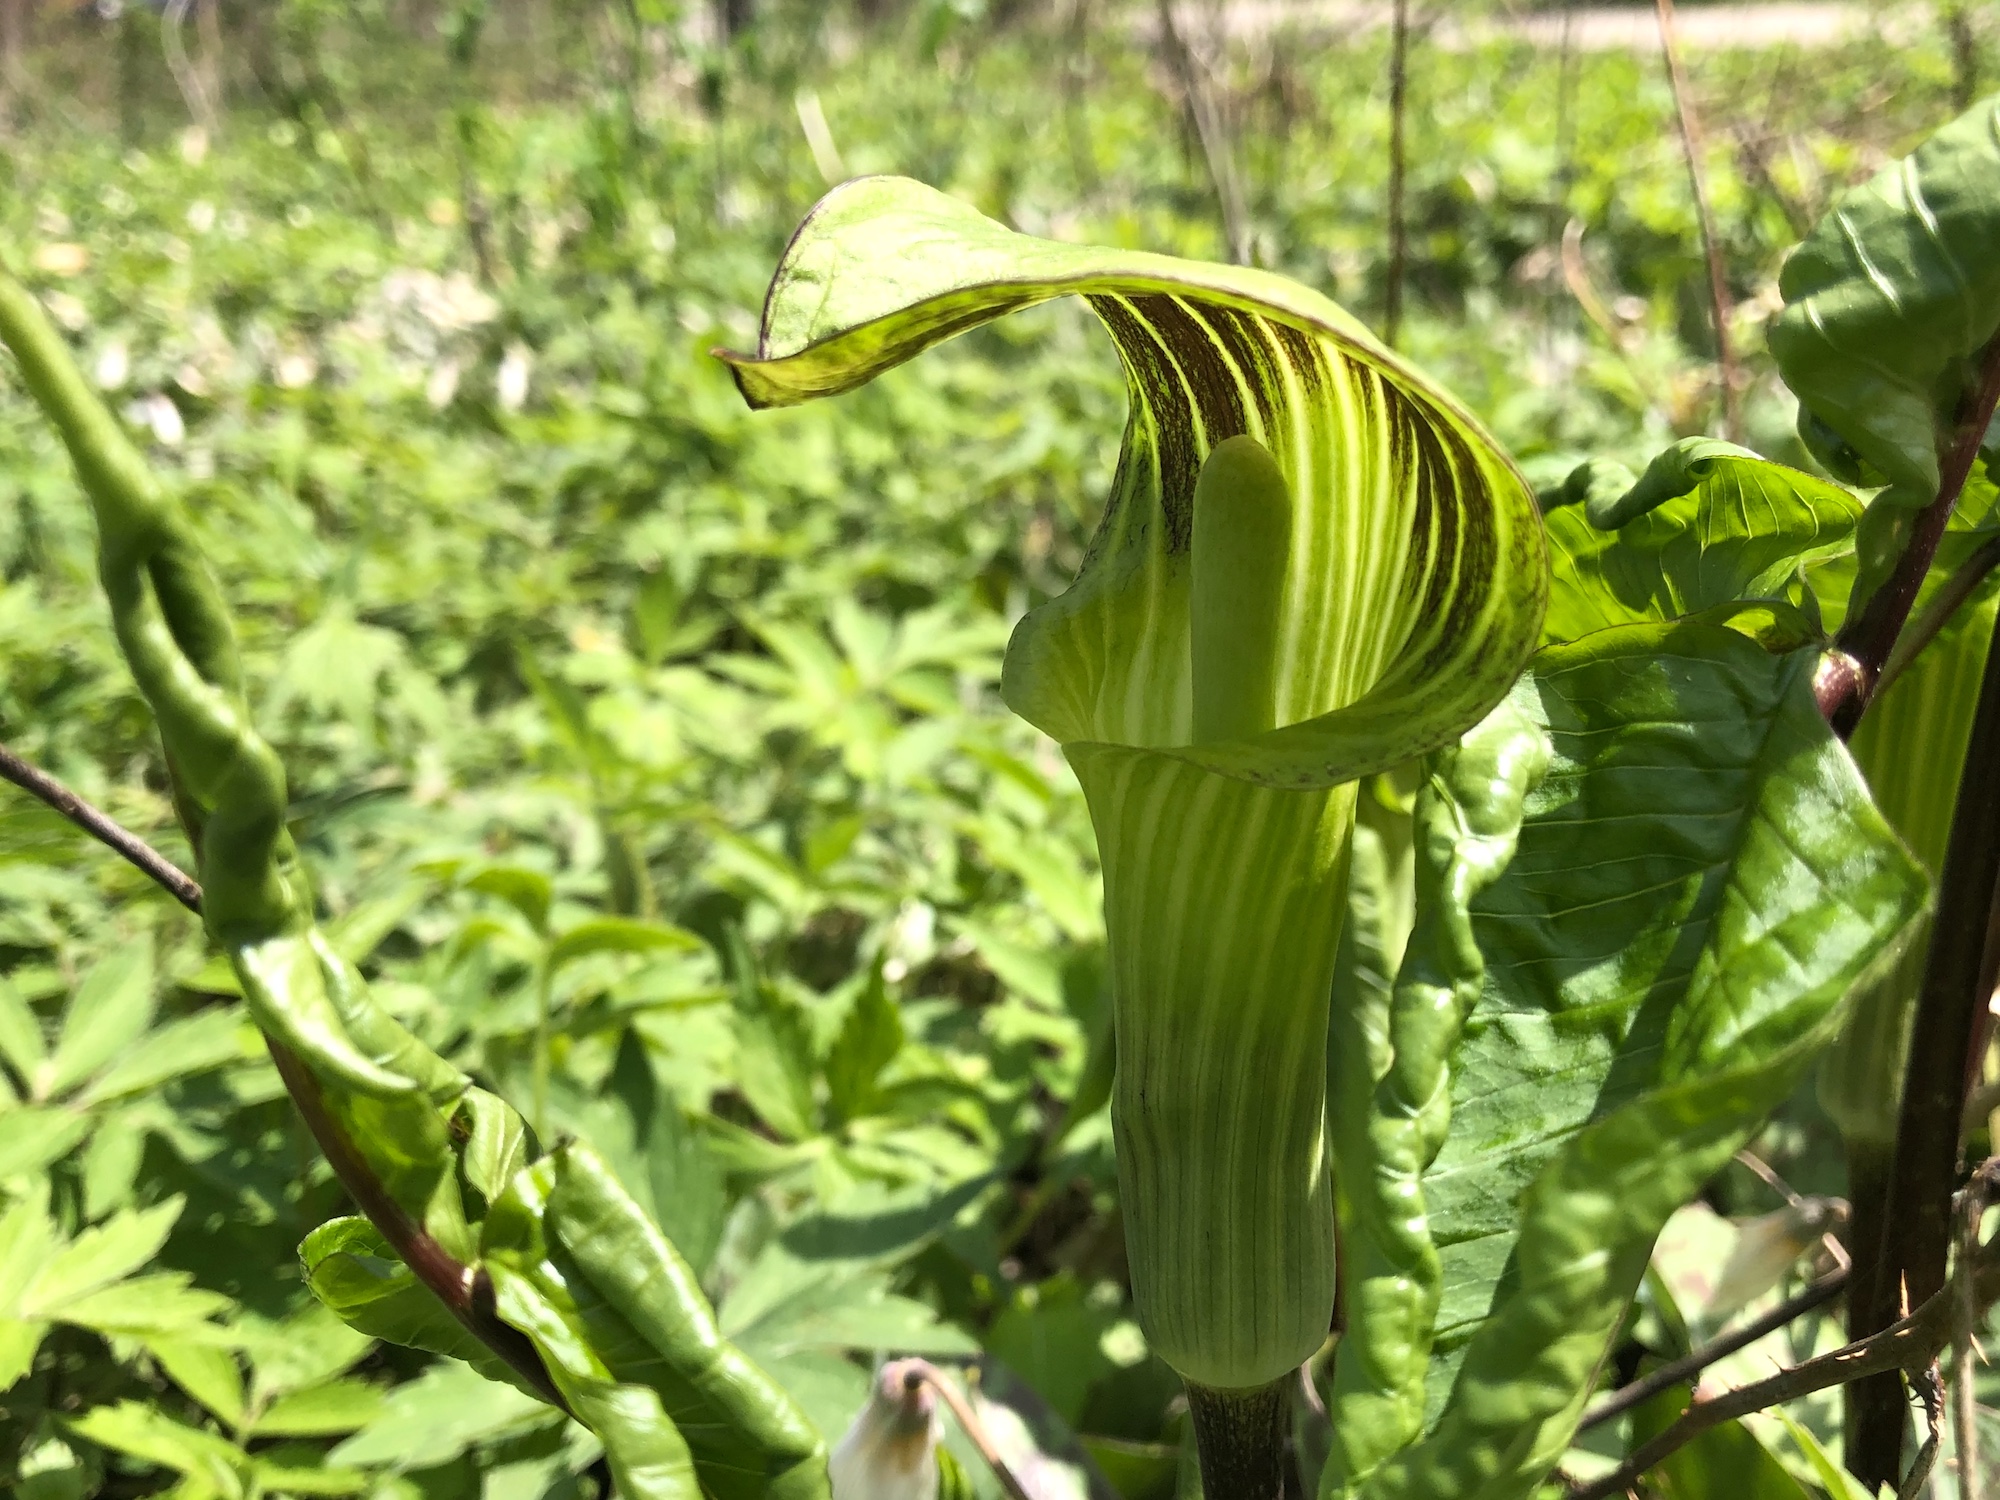 Jack-in-the-pulpit.